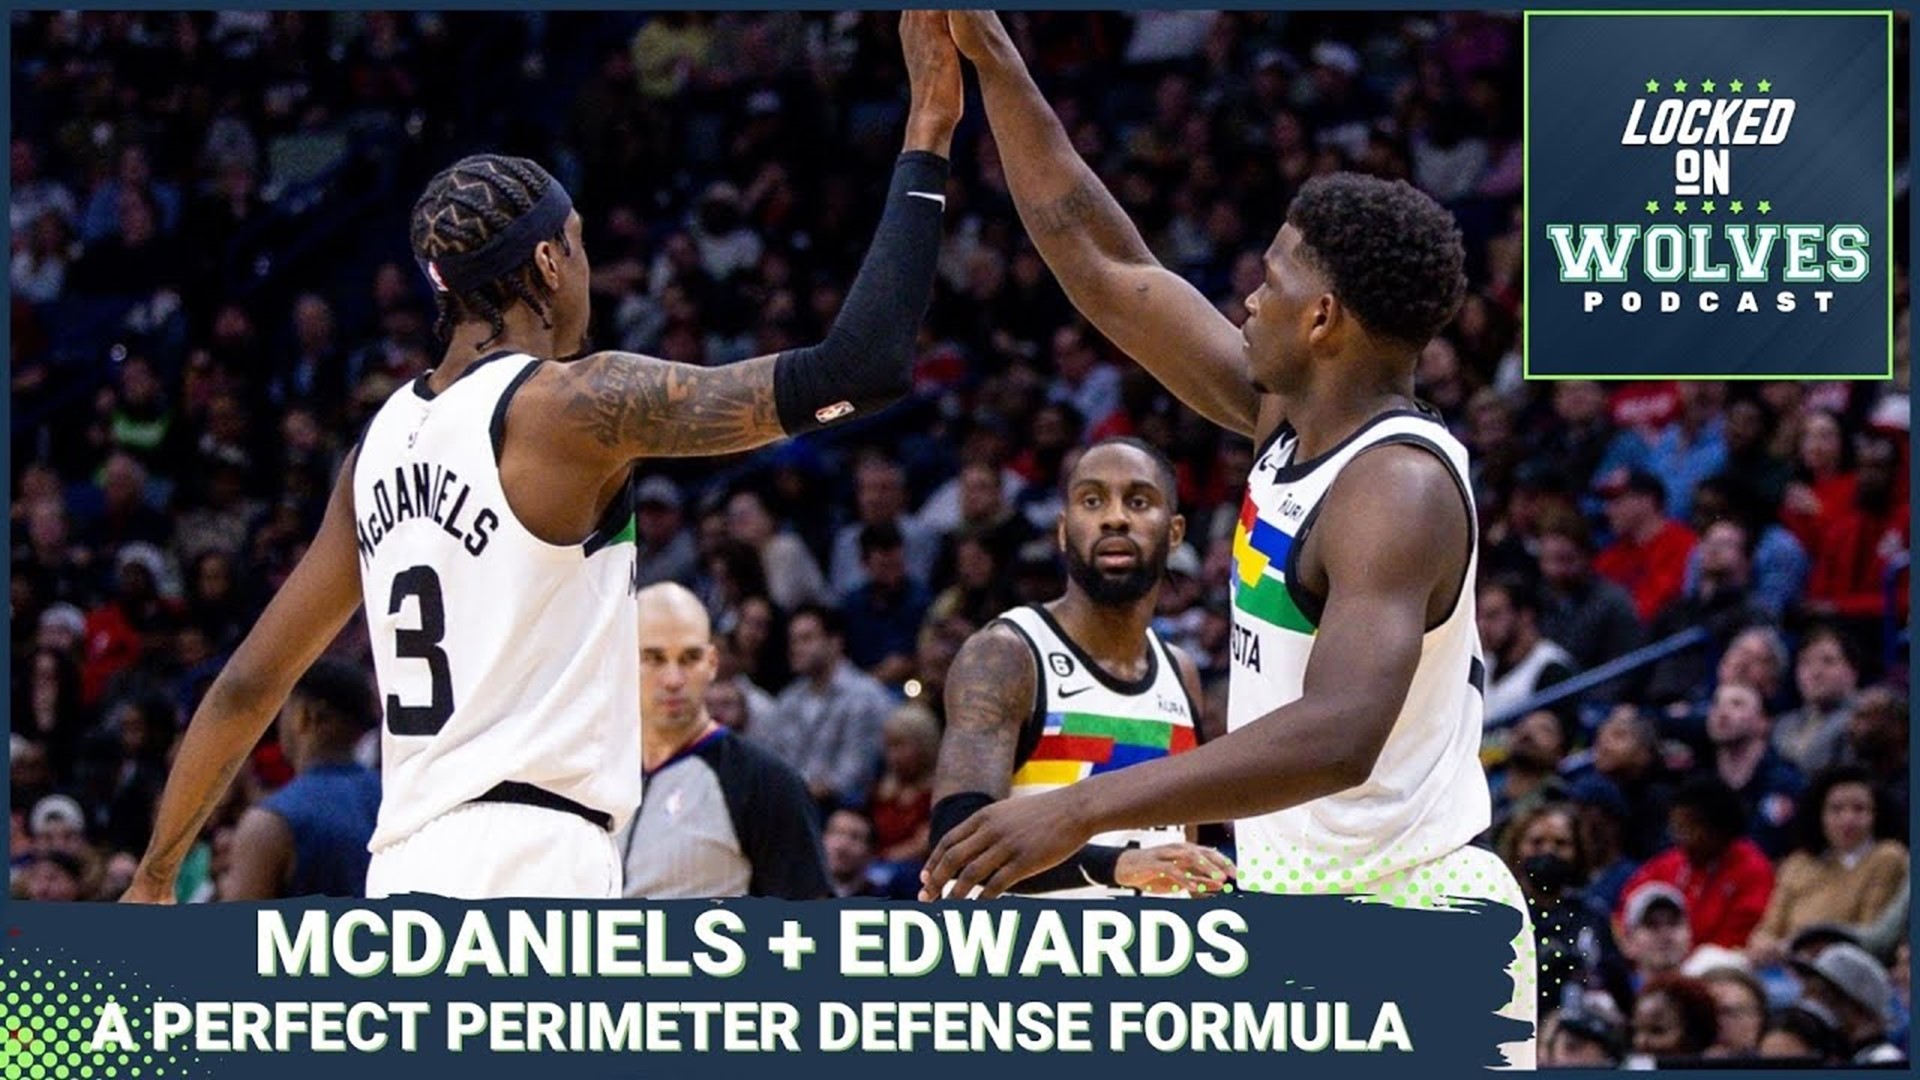 The Minnesota Timberwolves have two of the best perimeter defensive players in the league, but off-ball issues occasionally hold them back.